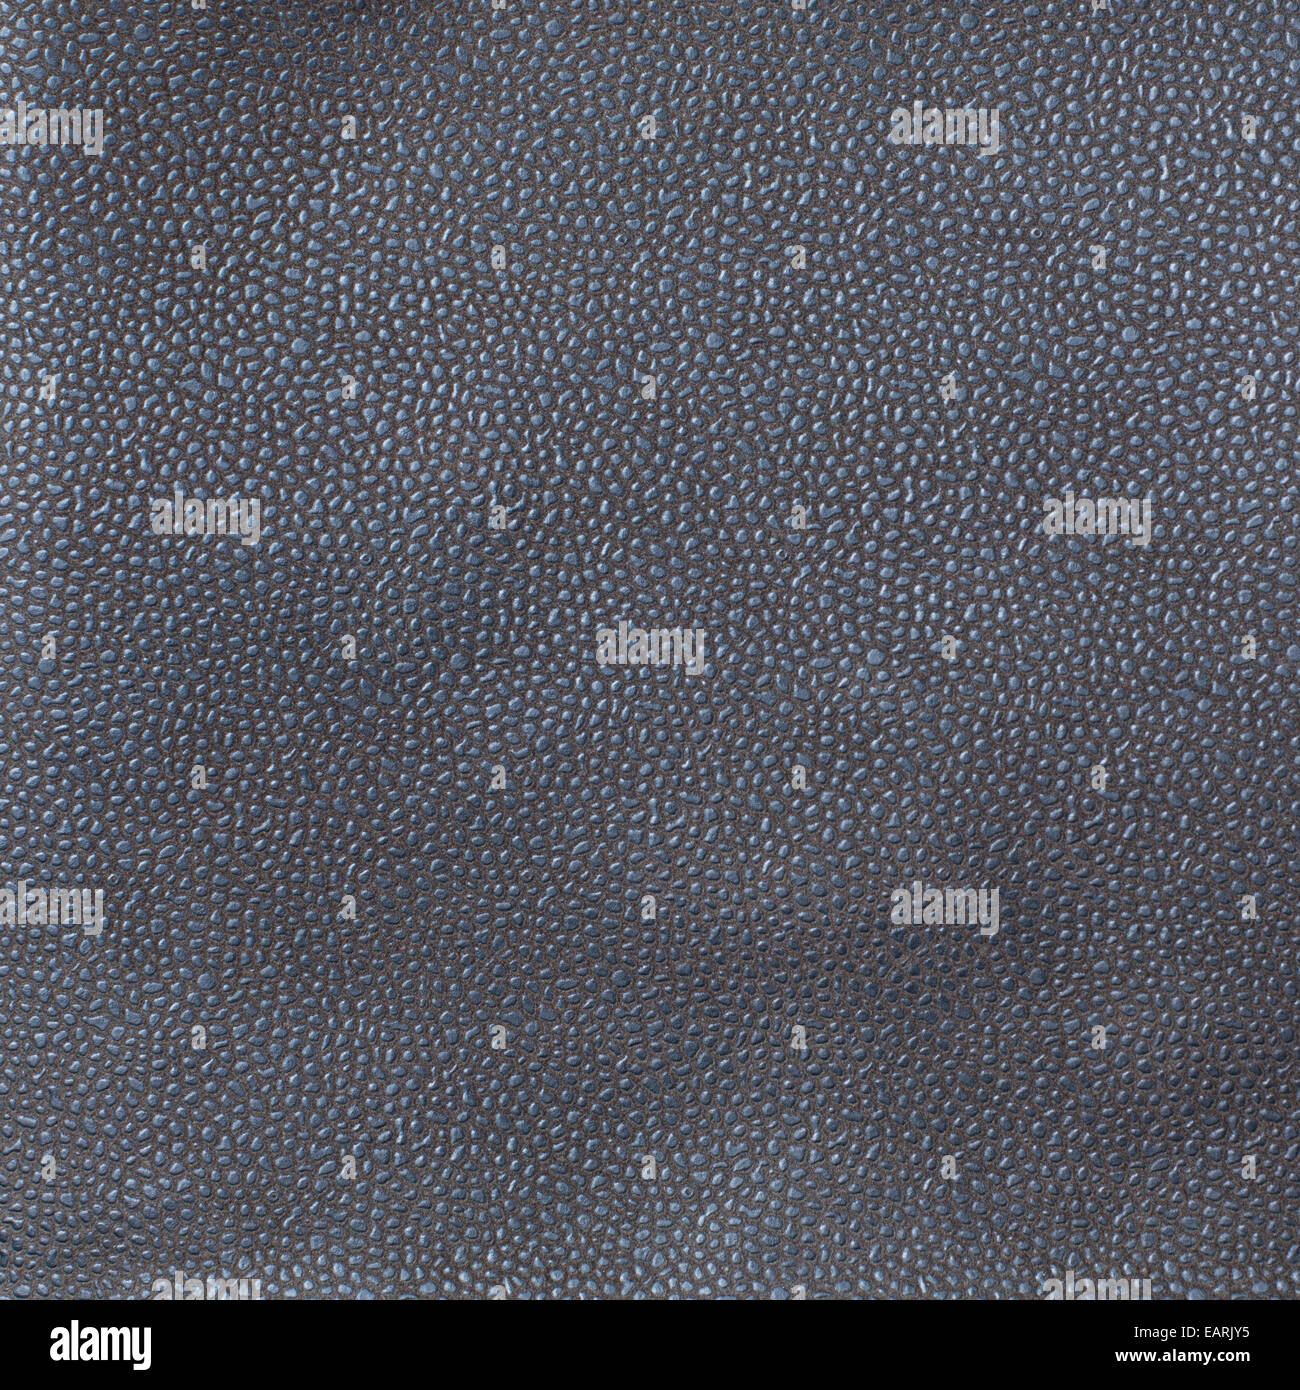 Dark gray or black leather texture background Stock Photo